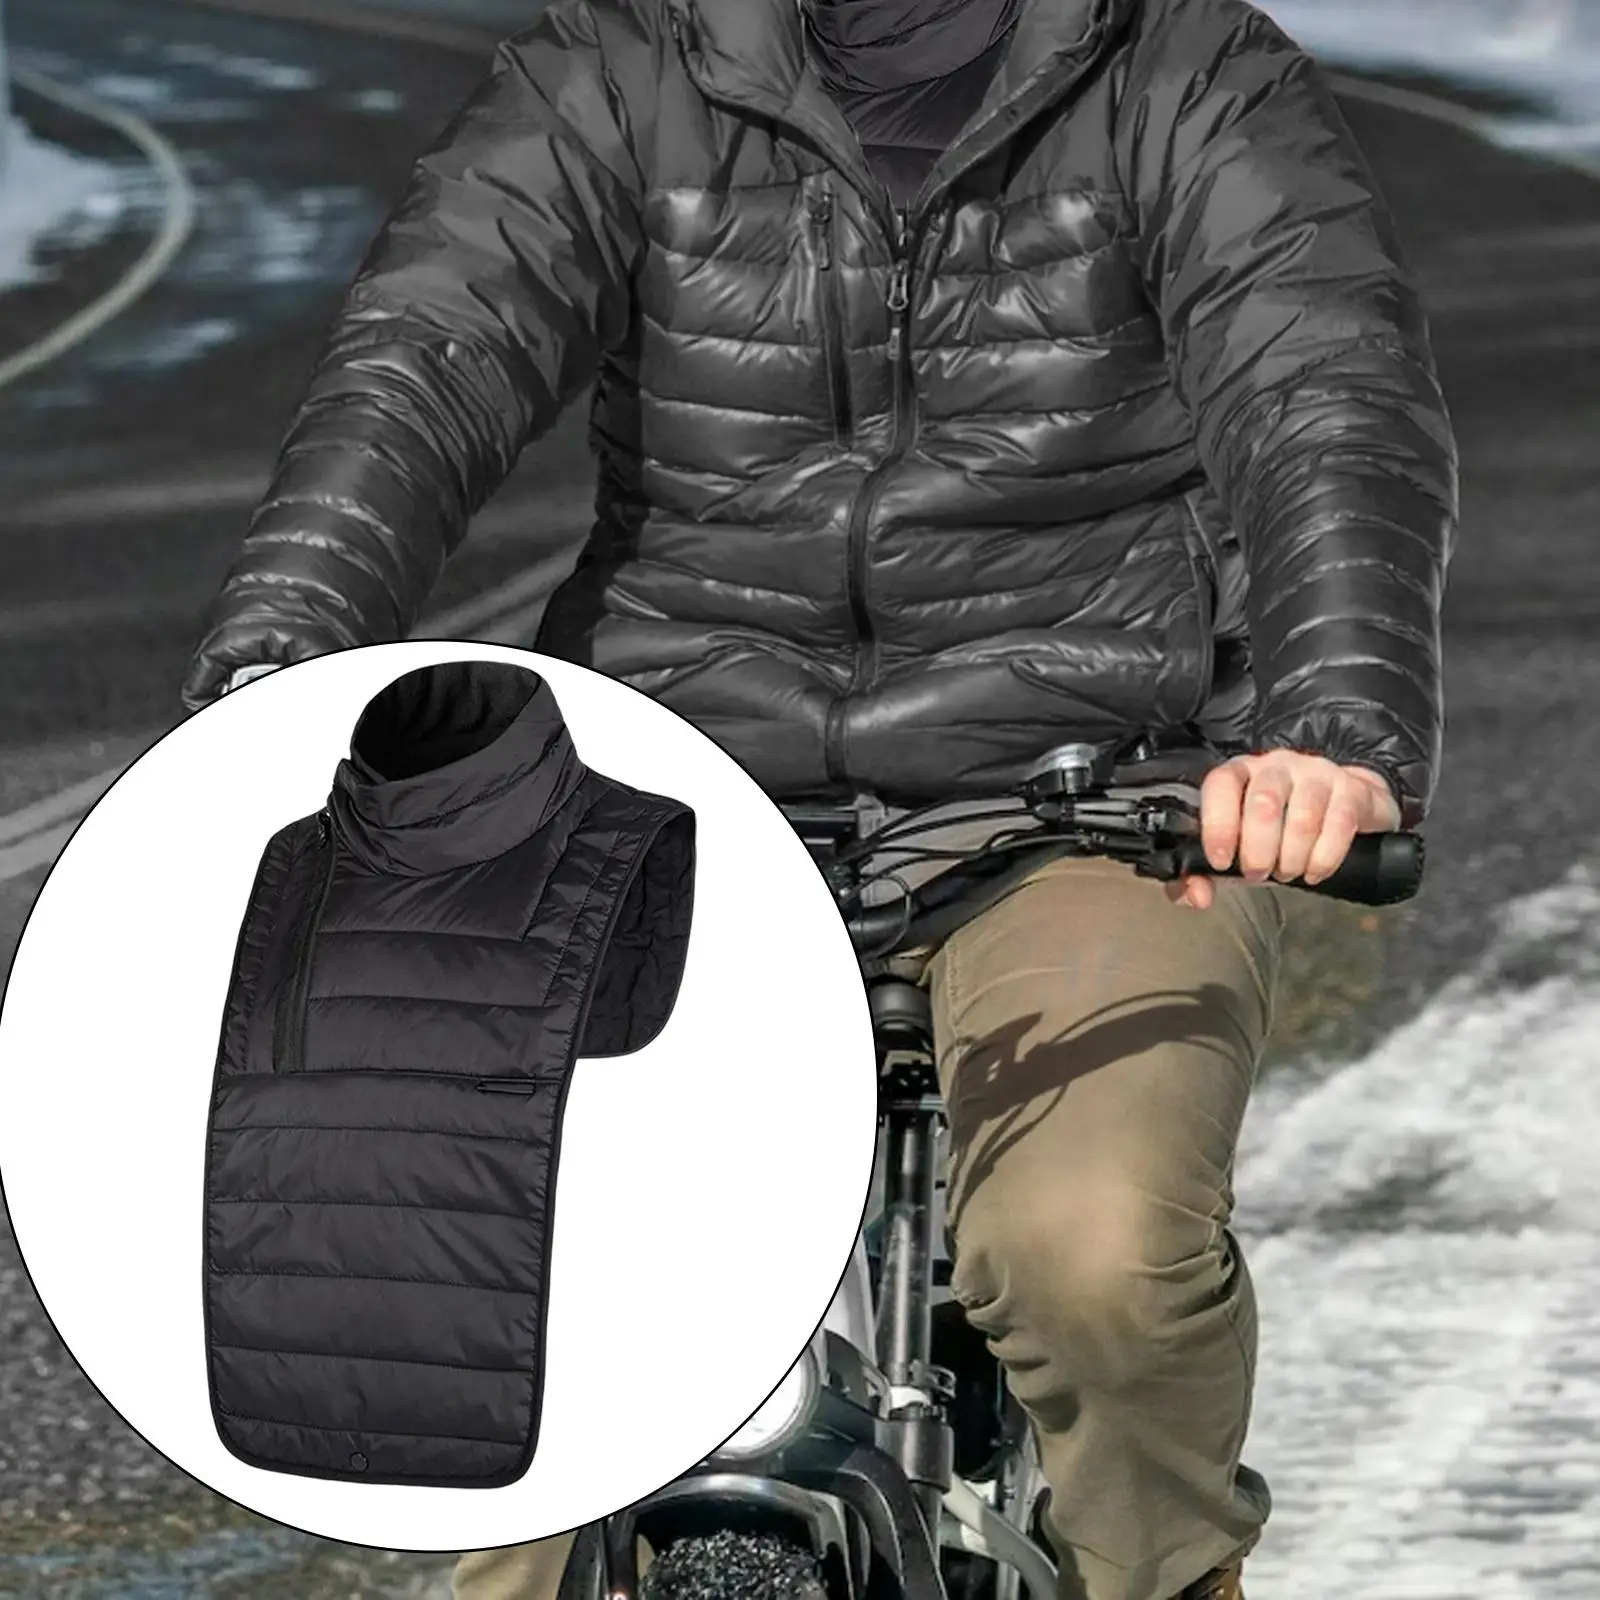 Universal Neck Warm Scarf Soft Washable for Running Snowboarding Motorcycle